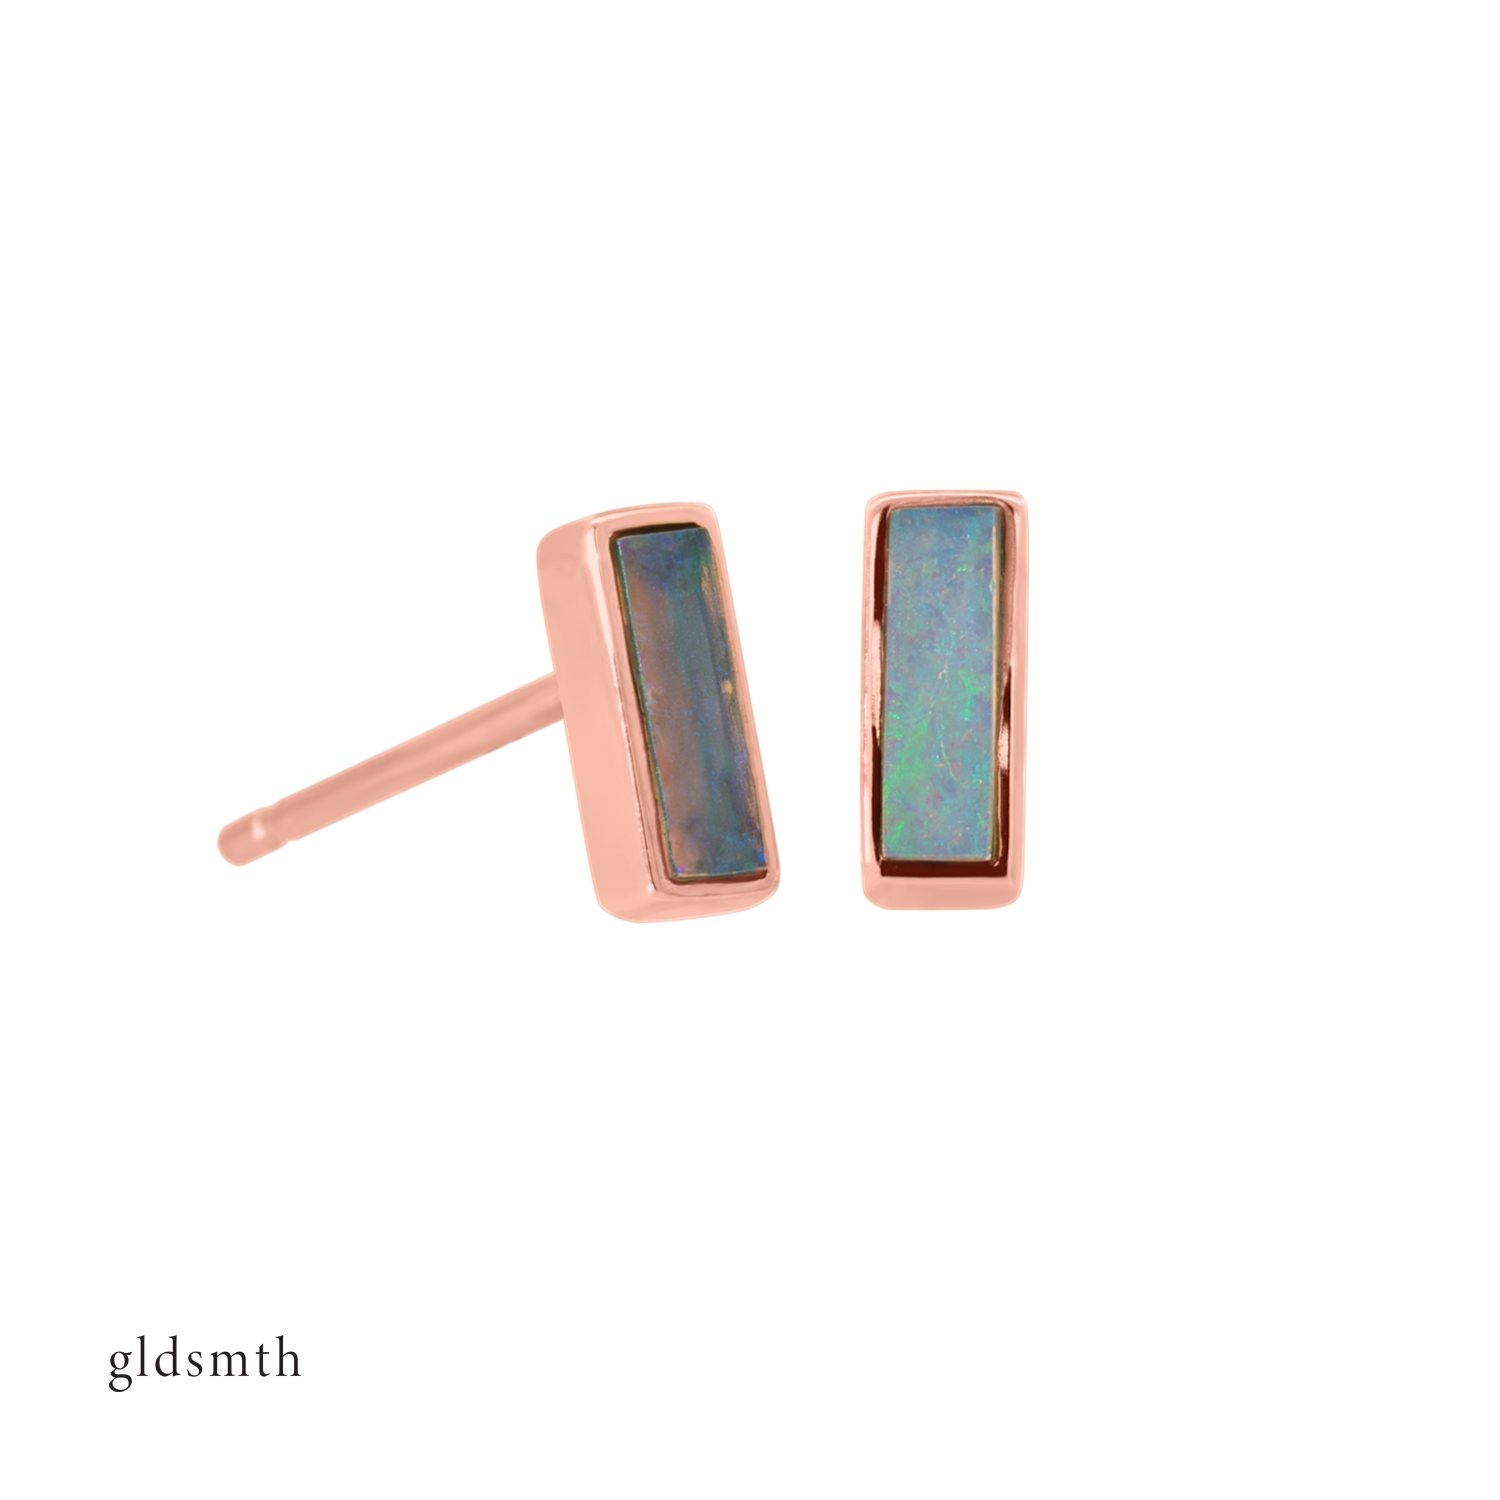 Fine and dainty studs. Solid rose gold earrings set with opal gemstones